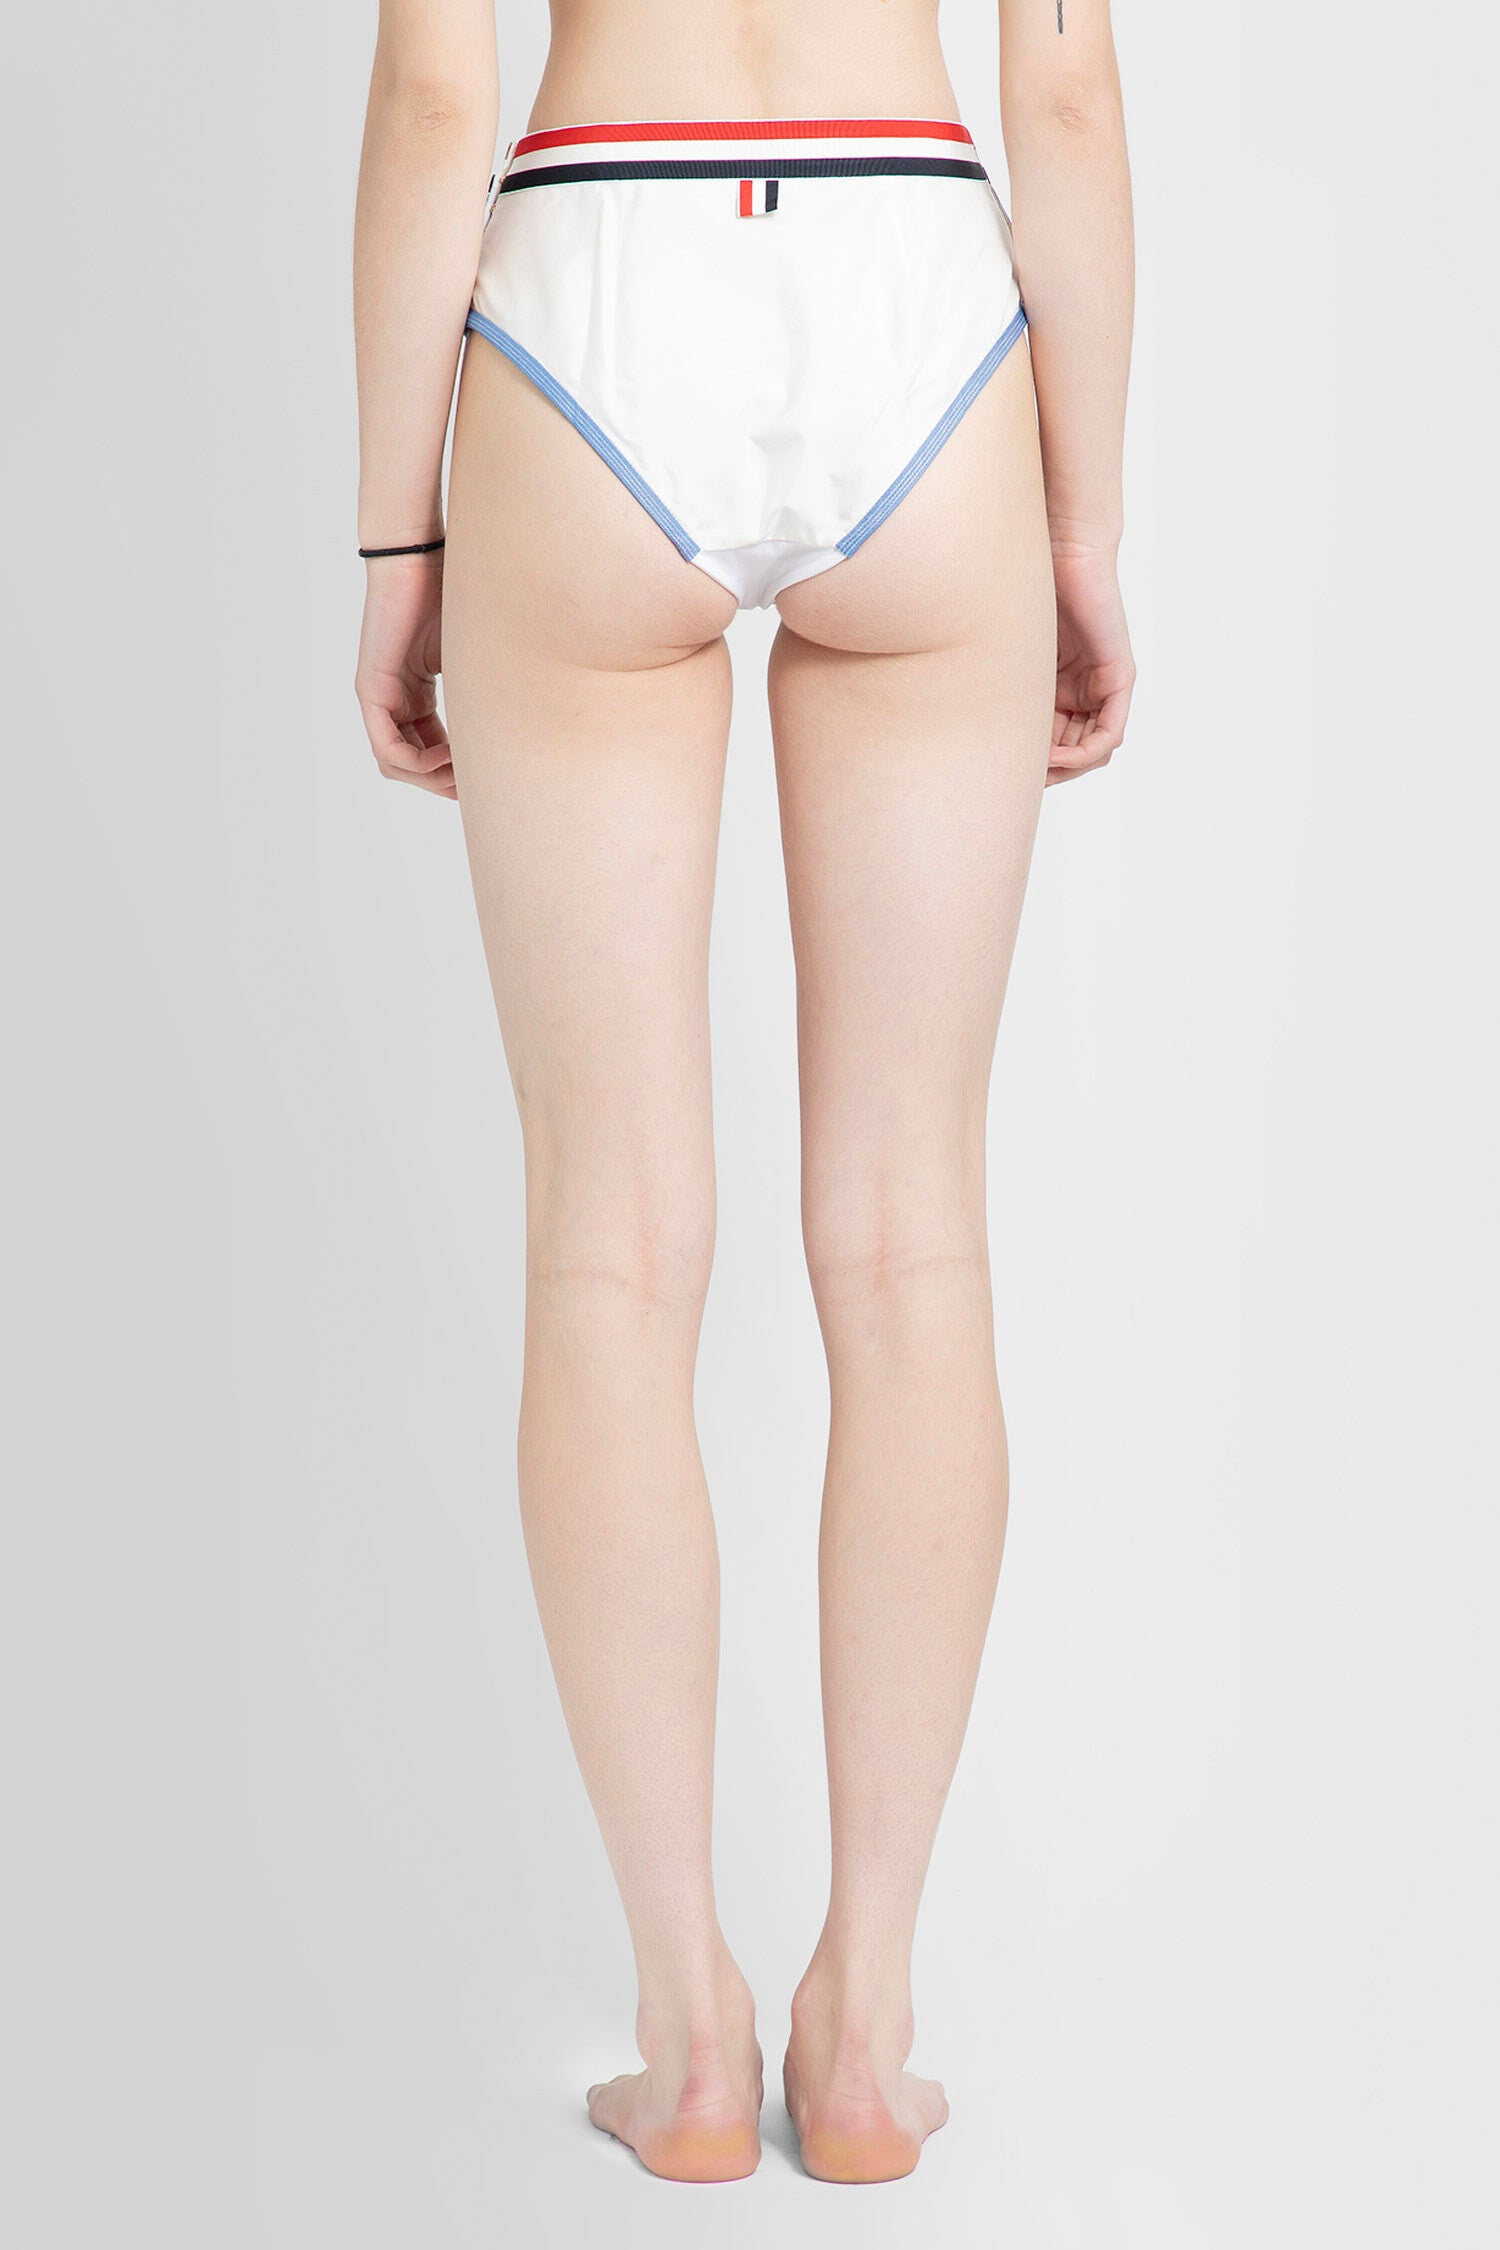 THOM BROWNE WOMAN WHITE LINGERIE